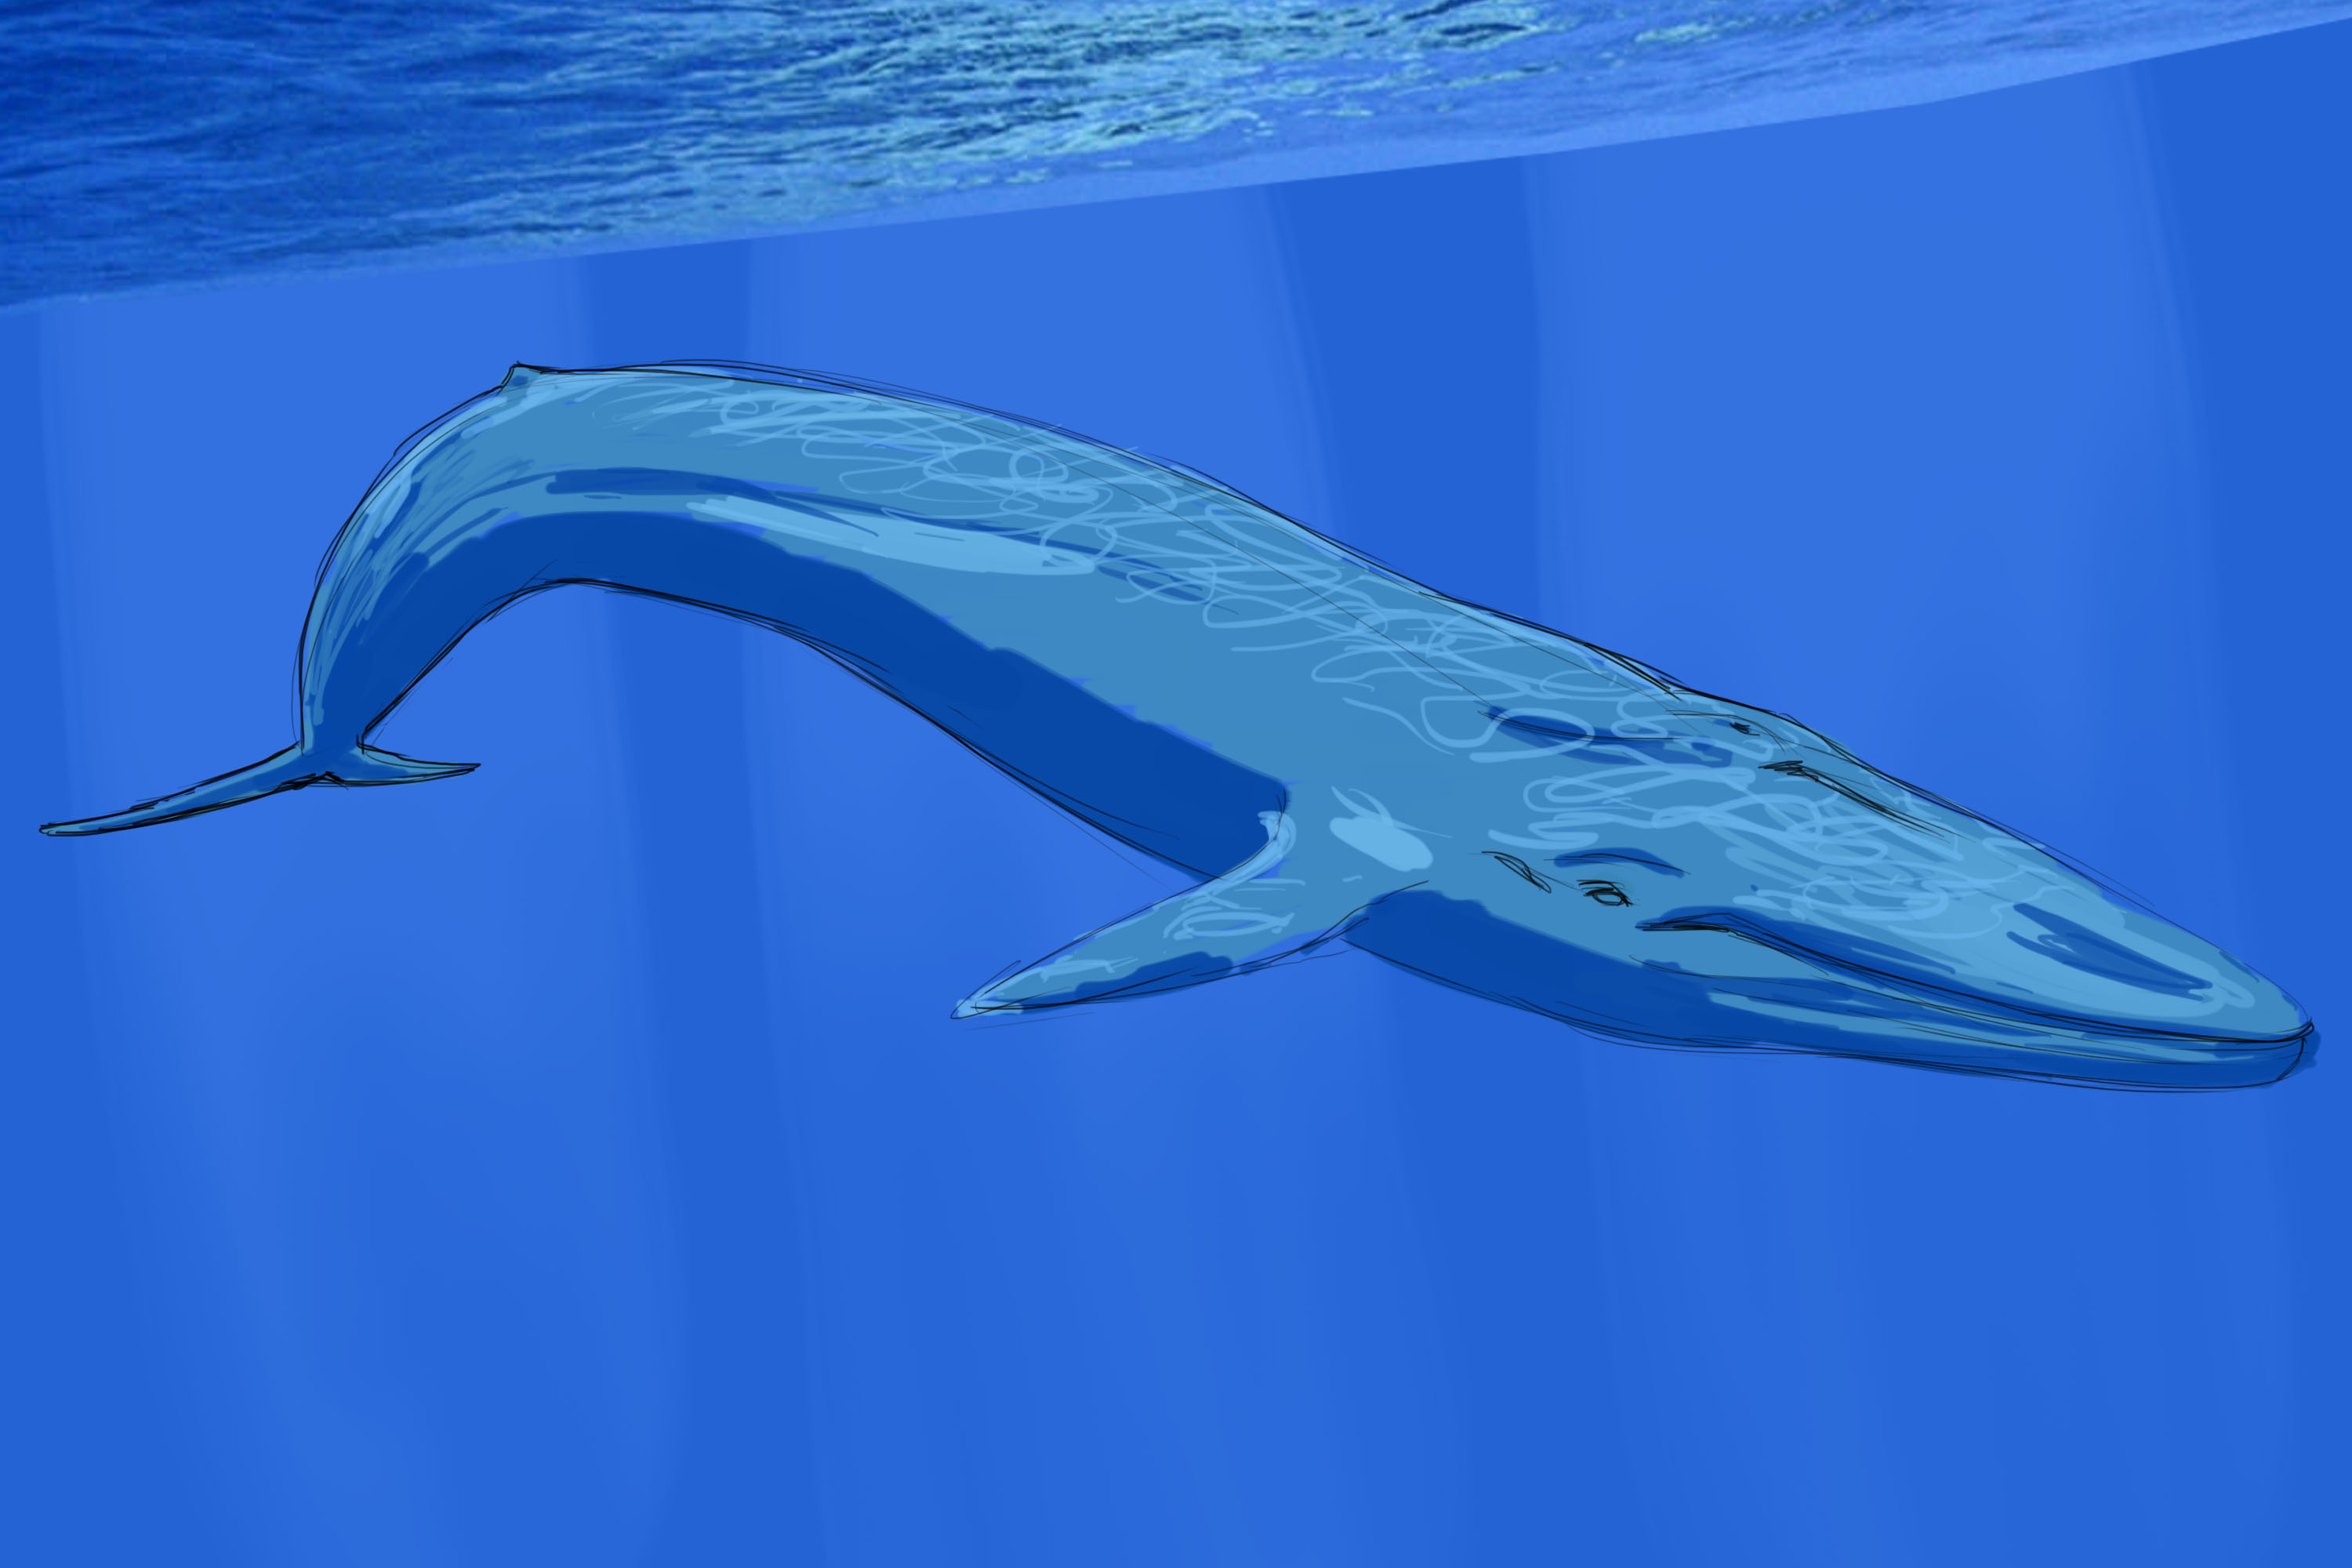 Blue whales have an estimated 0.5 million tonnes biomass from an average mass of 140,000kg but a population size of roughly 4700